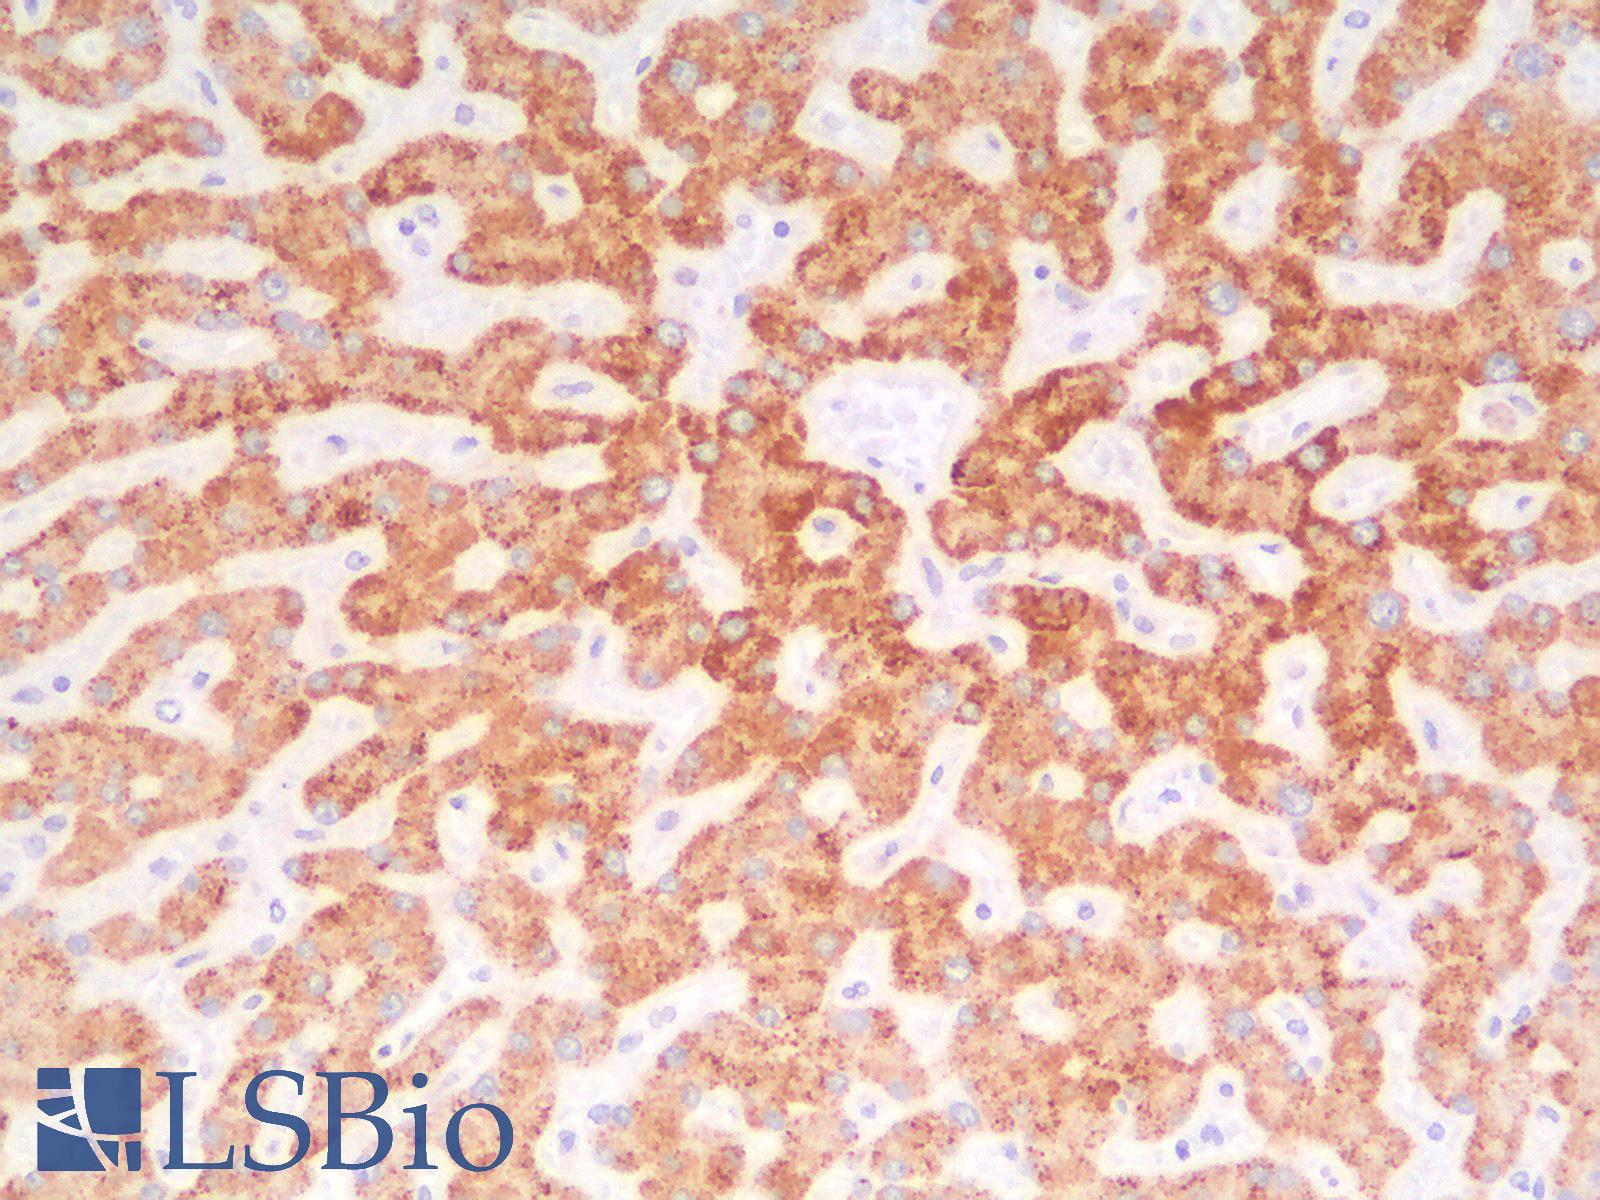 AMACR / P504S Antibody - Human Liver: Formalin-Fixed, Paraffin-Embedded (FFPE)